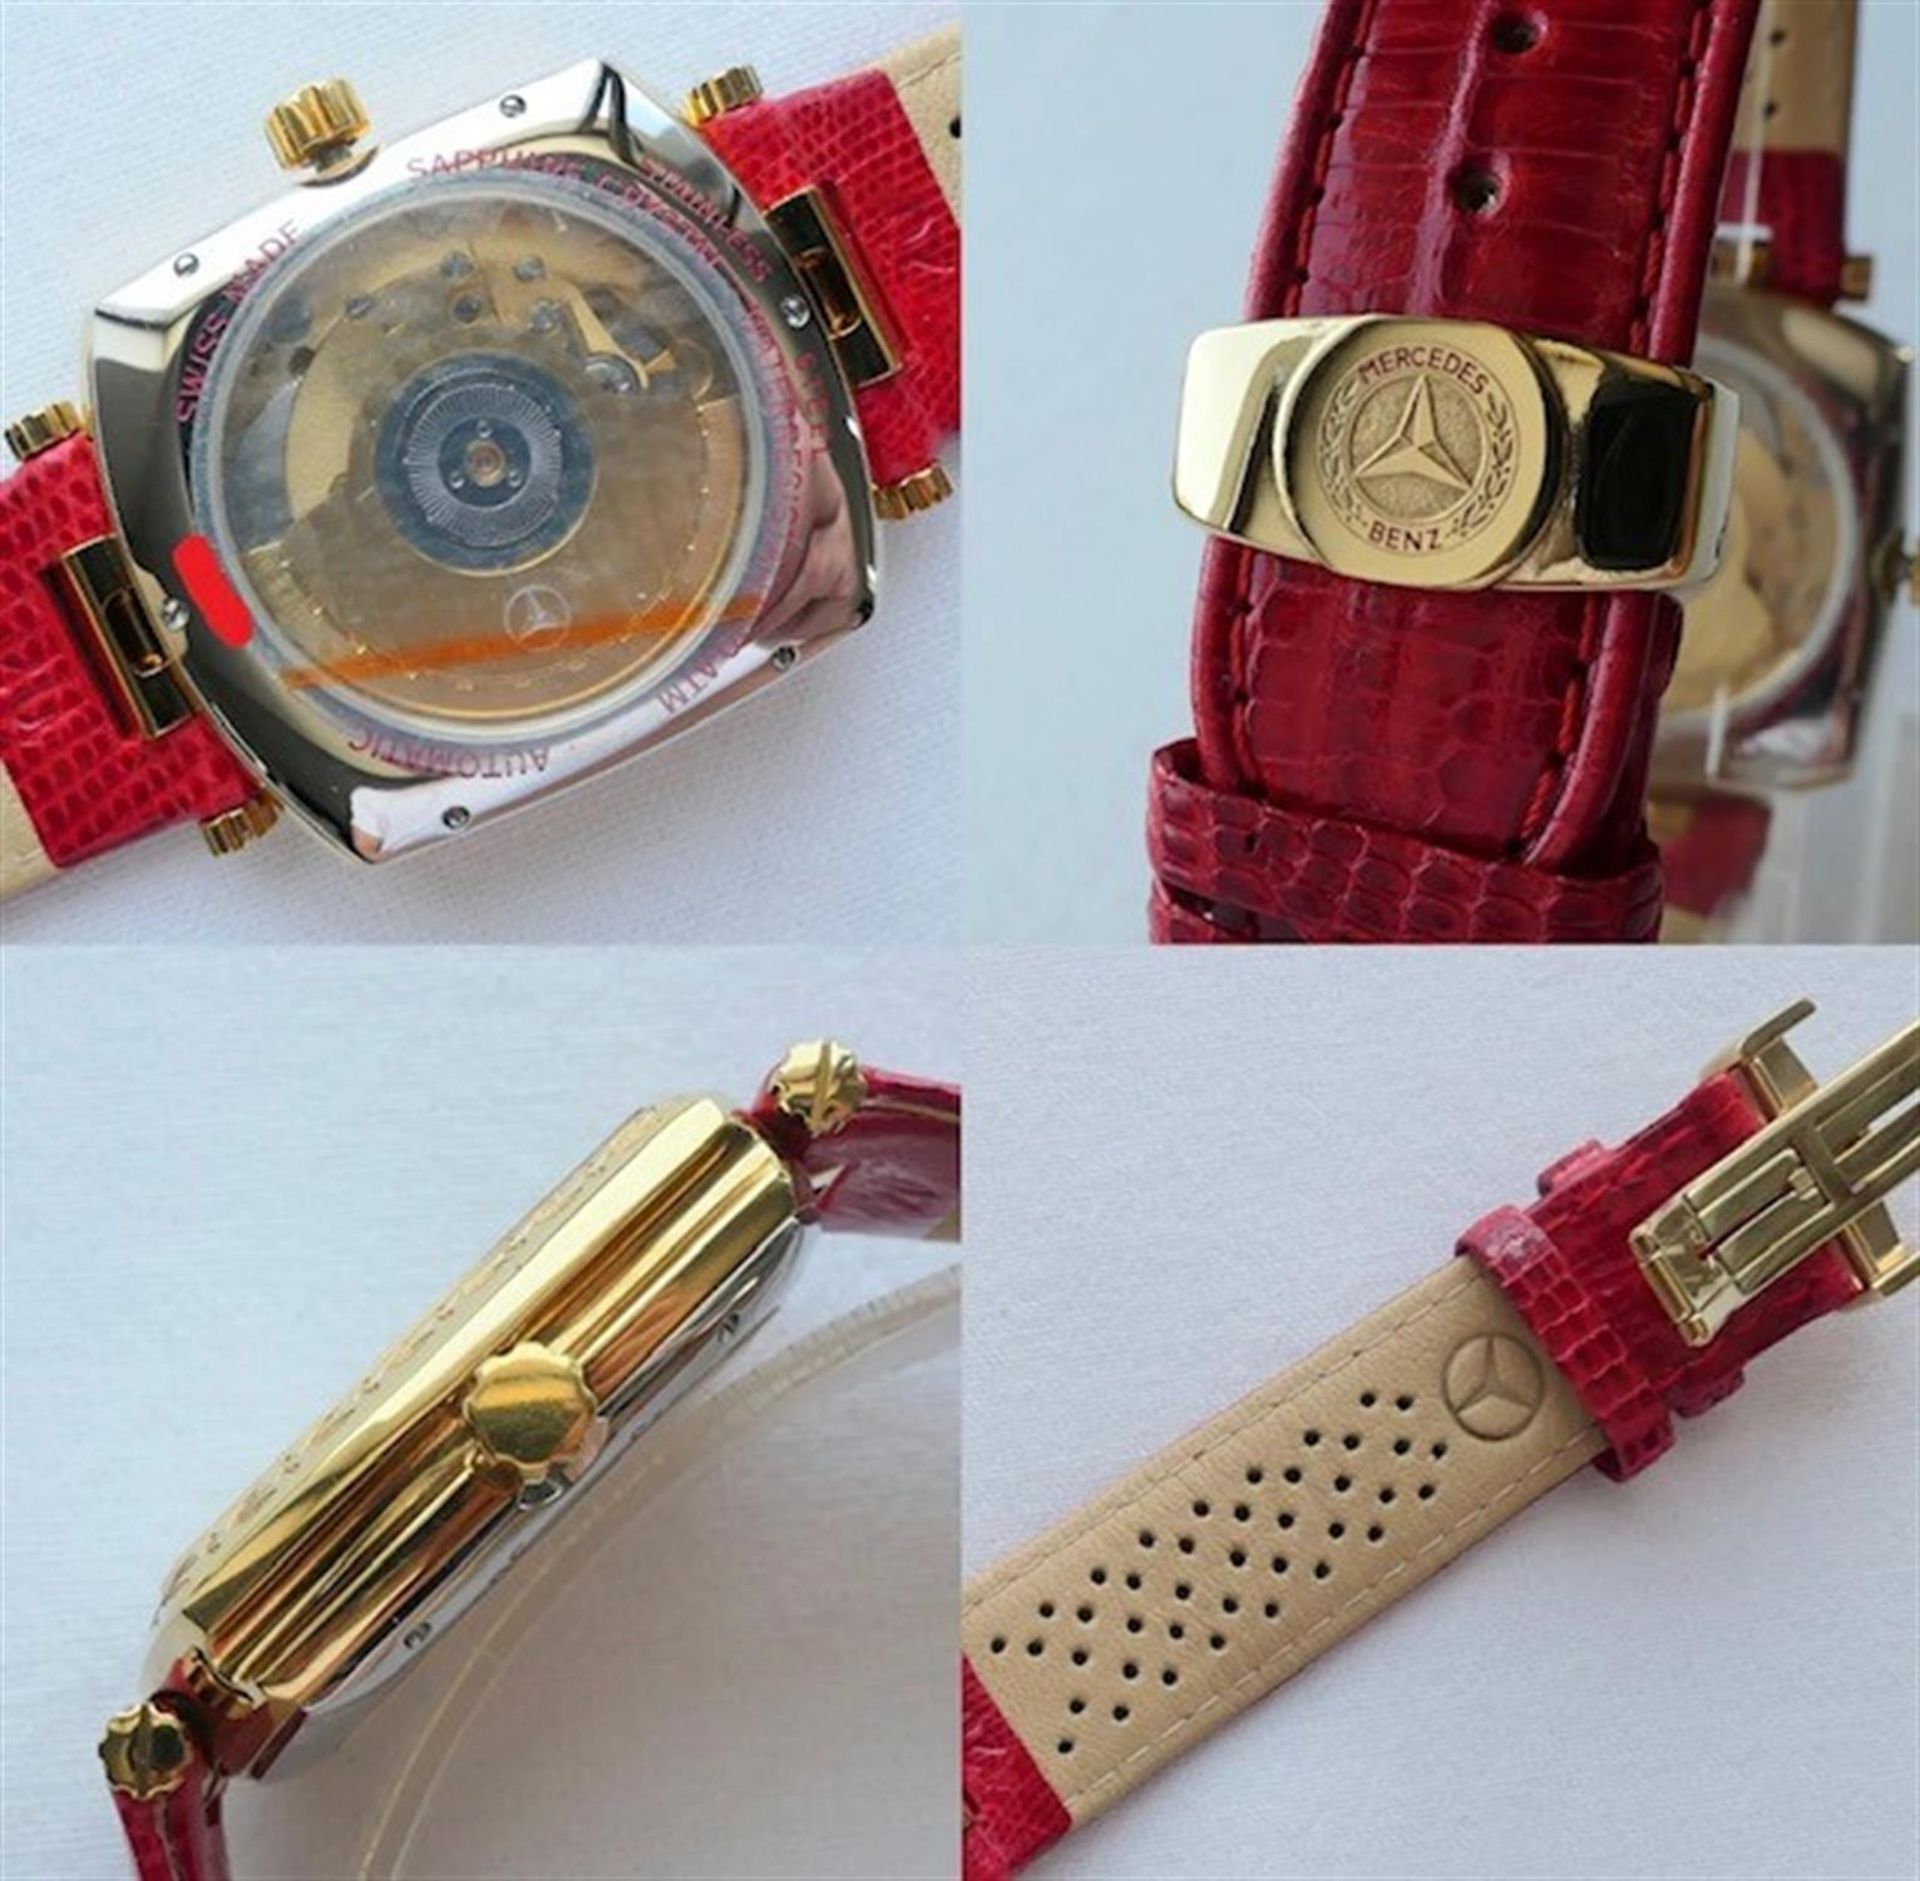 A 18ct Gold-Plated Mercedes-Benz Swiss-Made Automatic Wrist Watch - Image 10 of 10